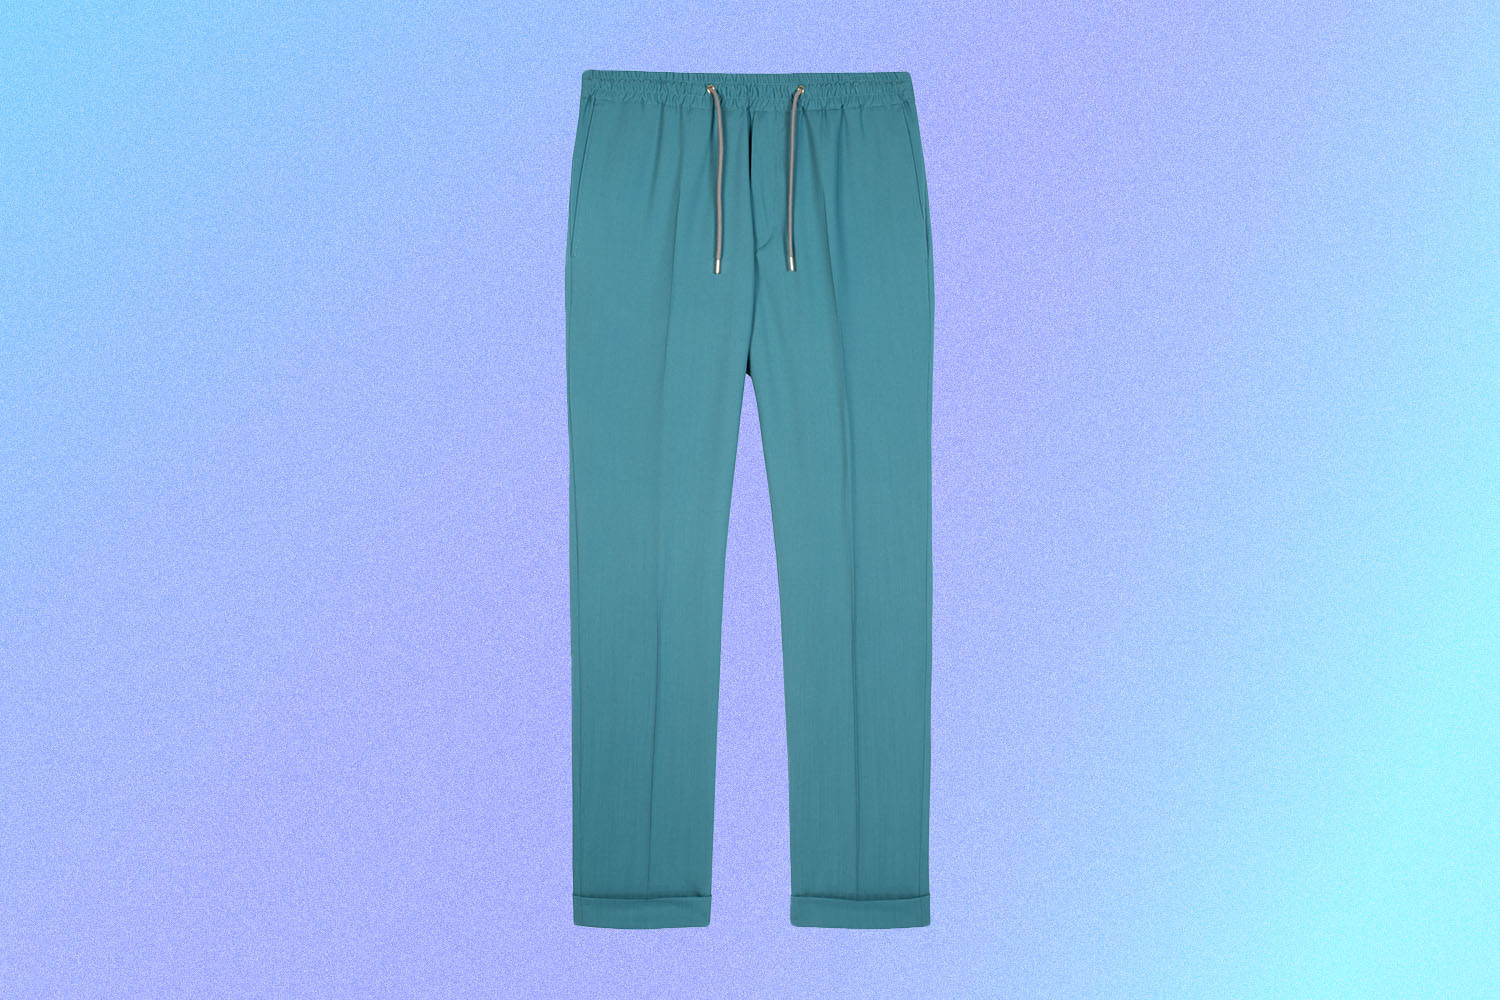 A pair of wool drawstring pants in a turquoise blue on a multi-colored blue-purple background